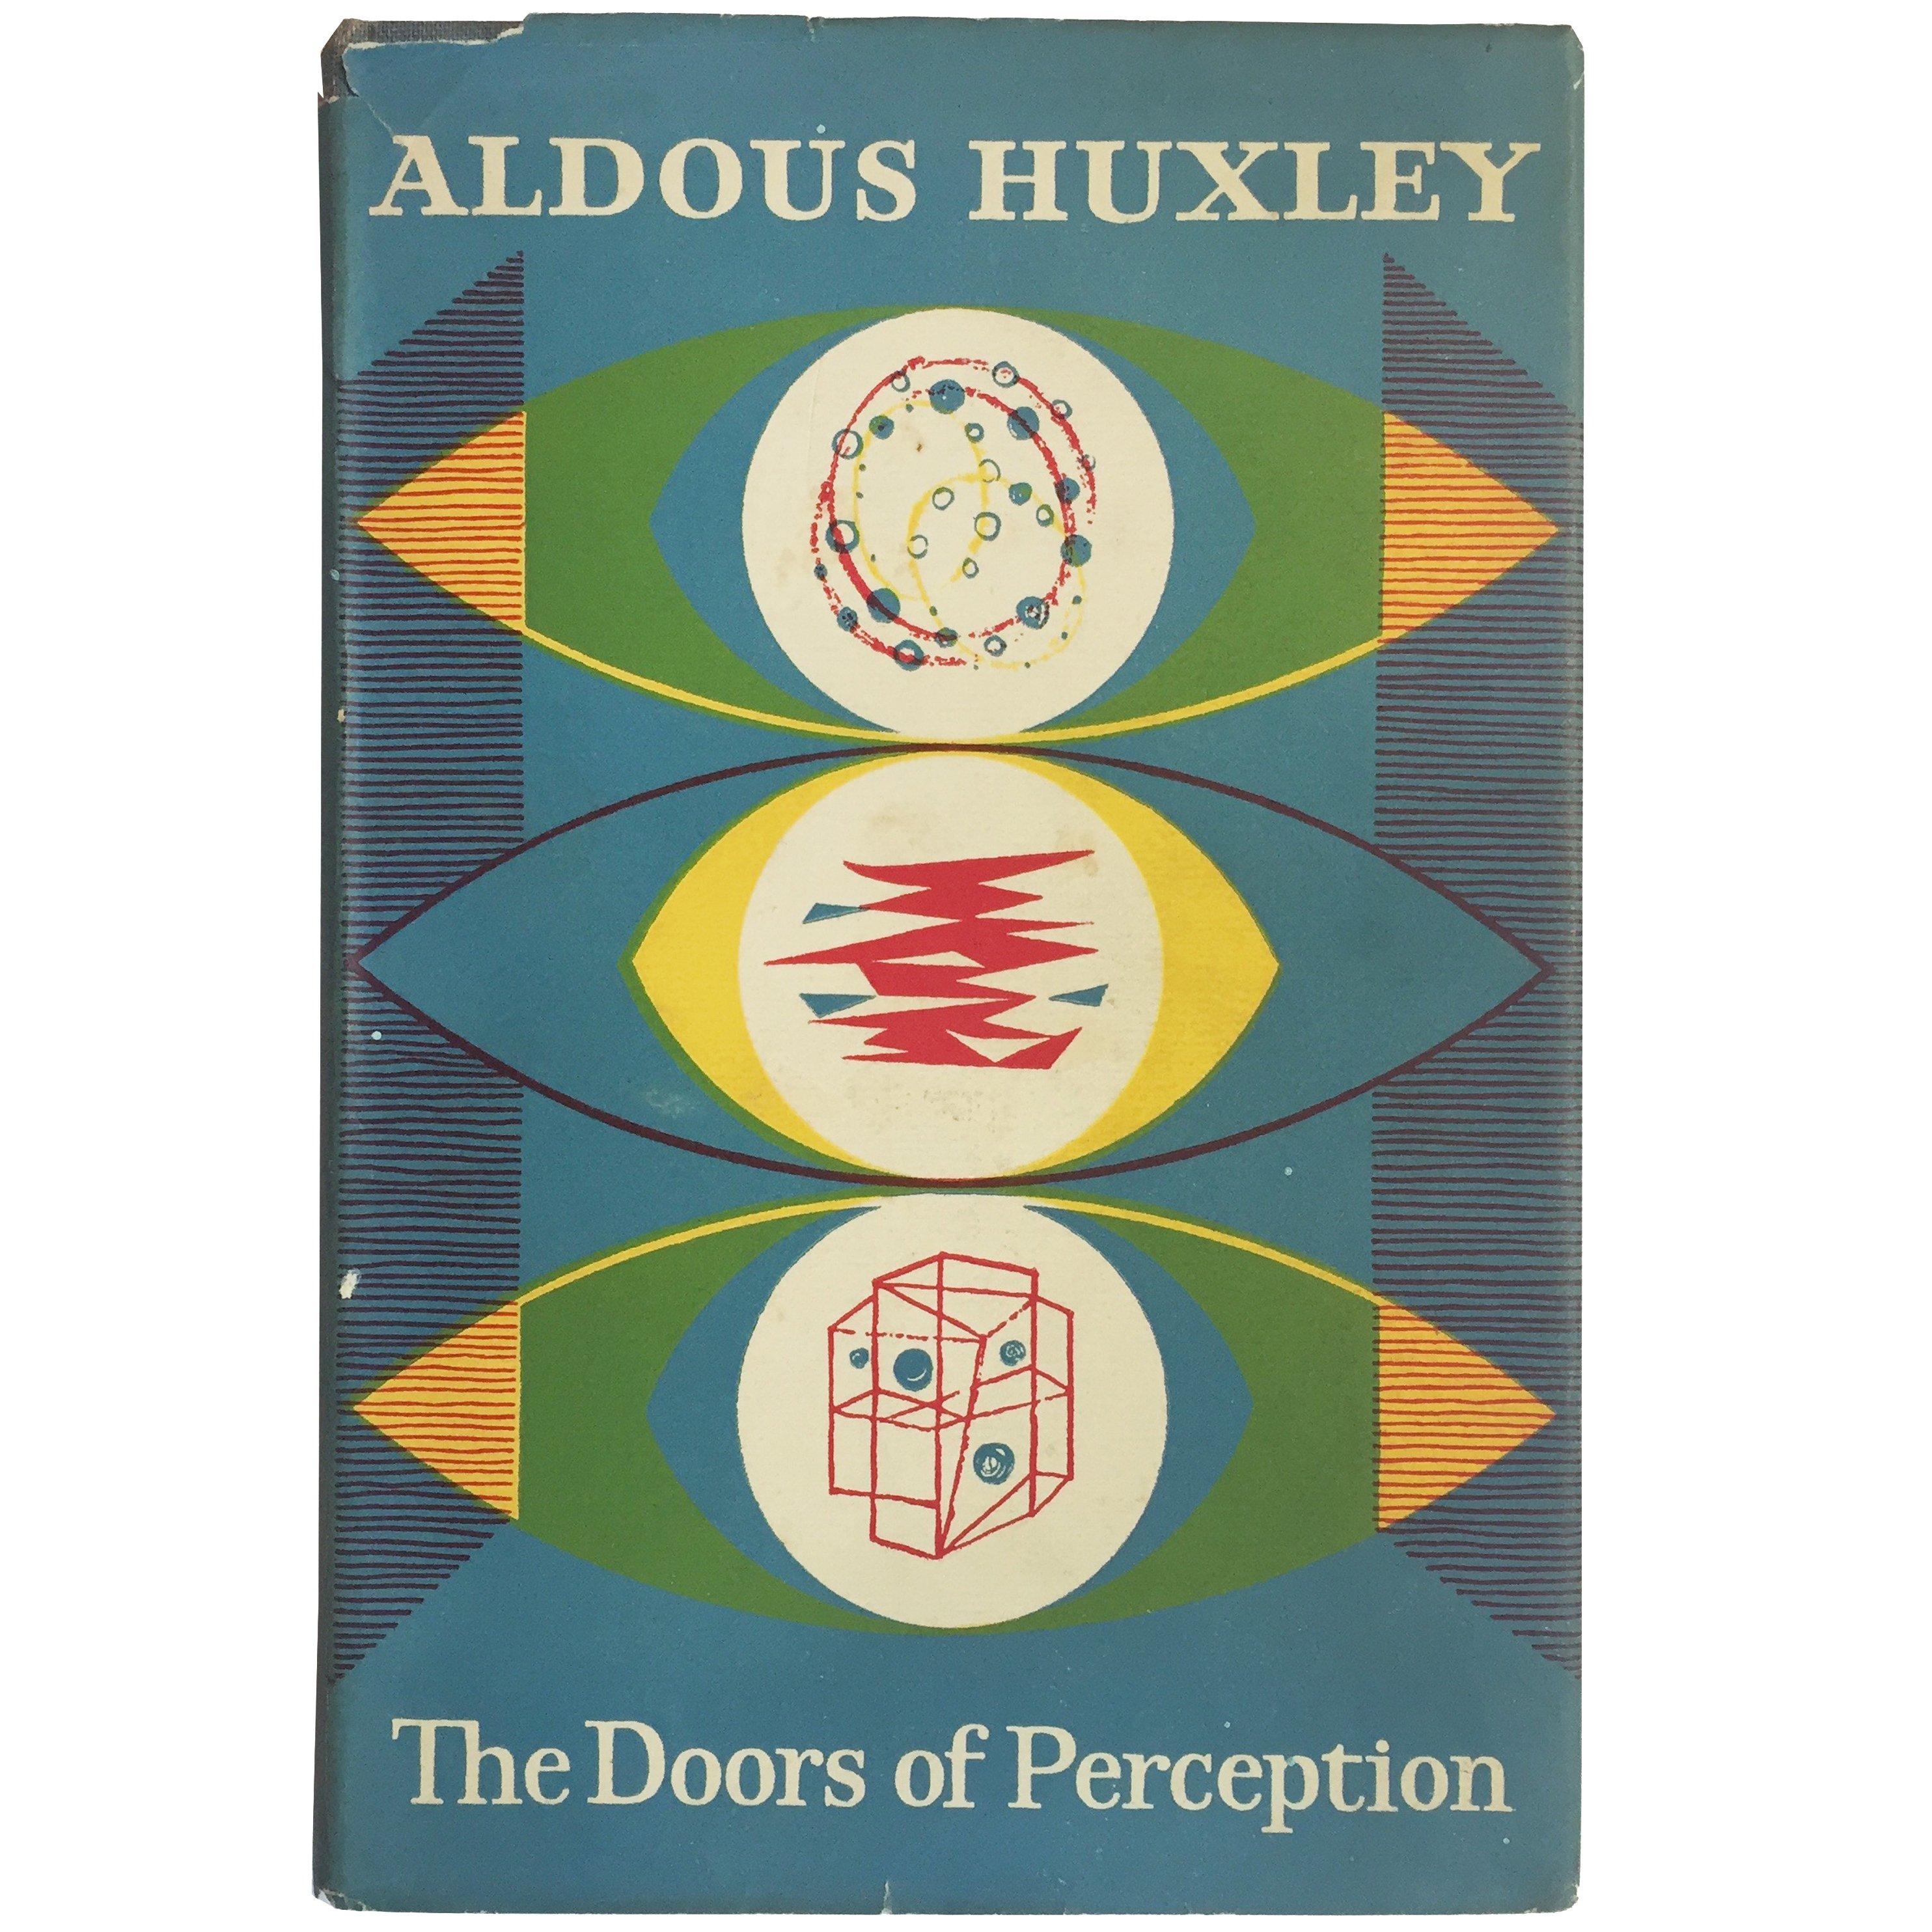 "Aldous Huxley - The Doors of Perception" First Edition Book, 1954 For Sale